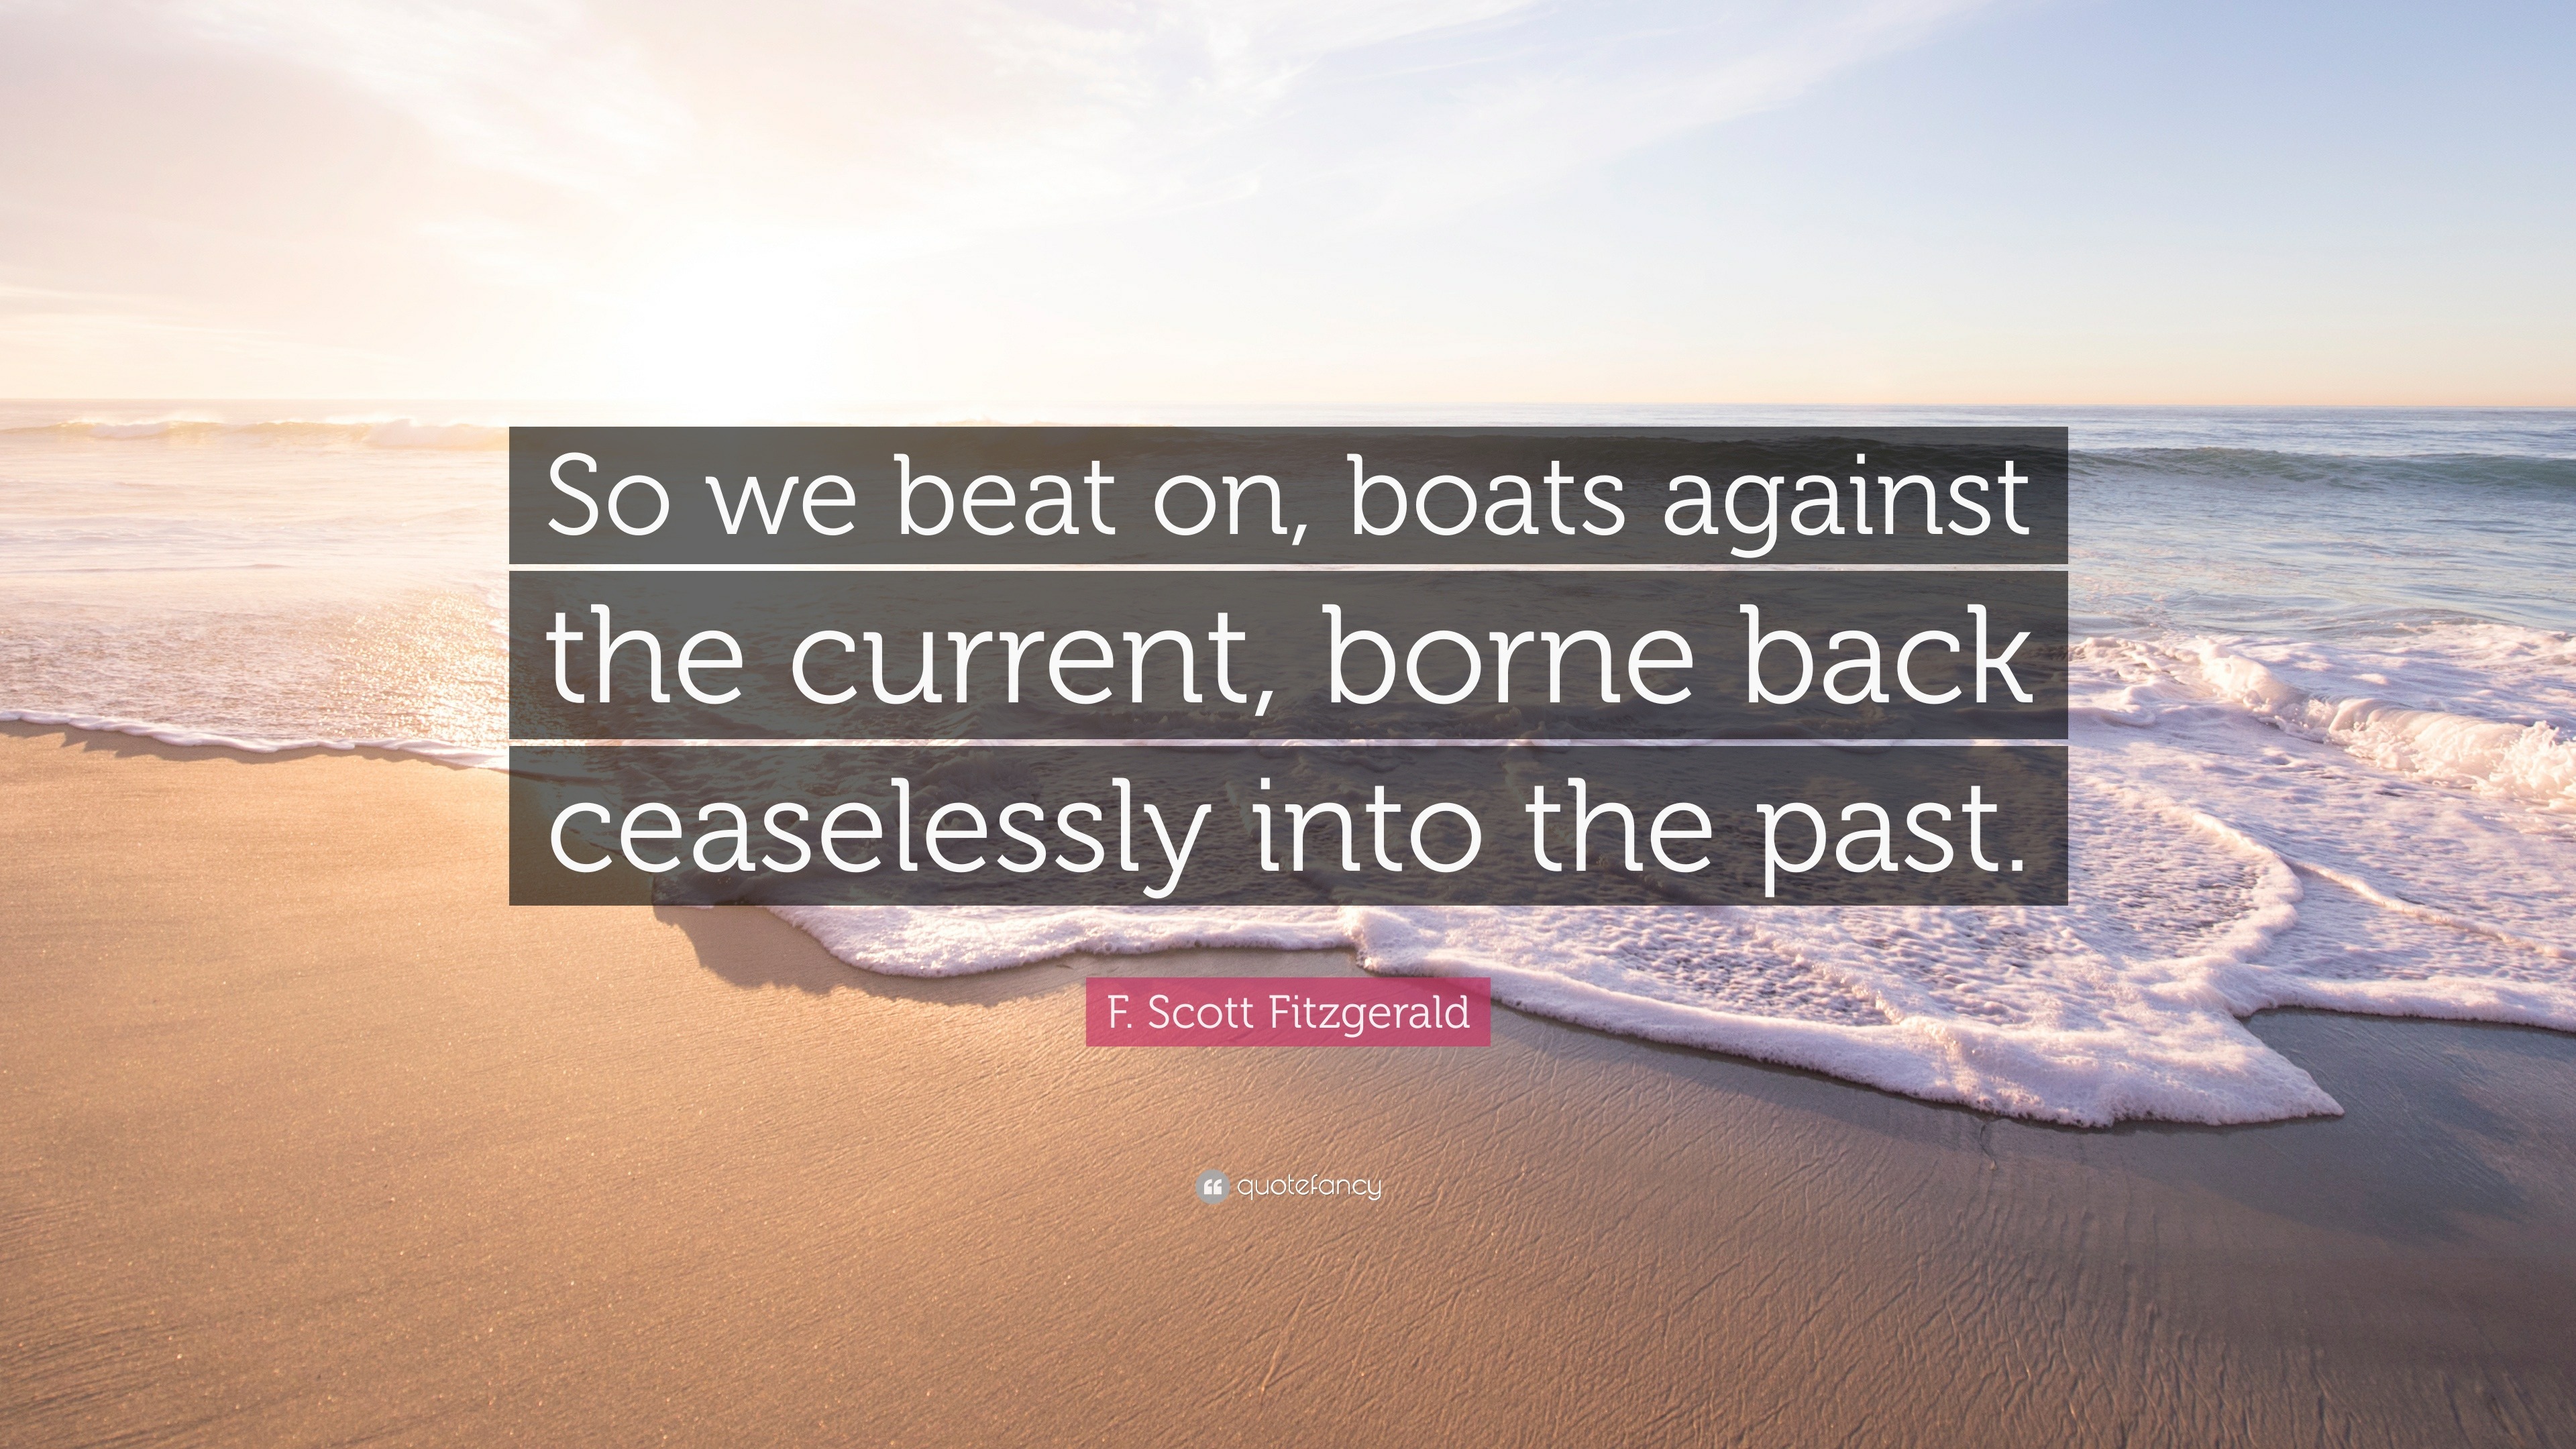 F. Scott Fitzgerald Quote: "So we beat on, boats against ...